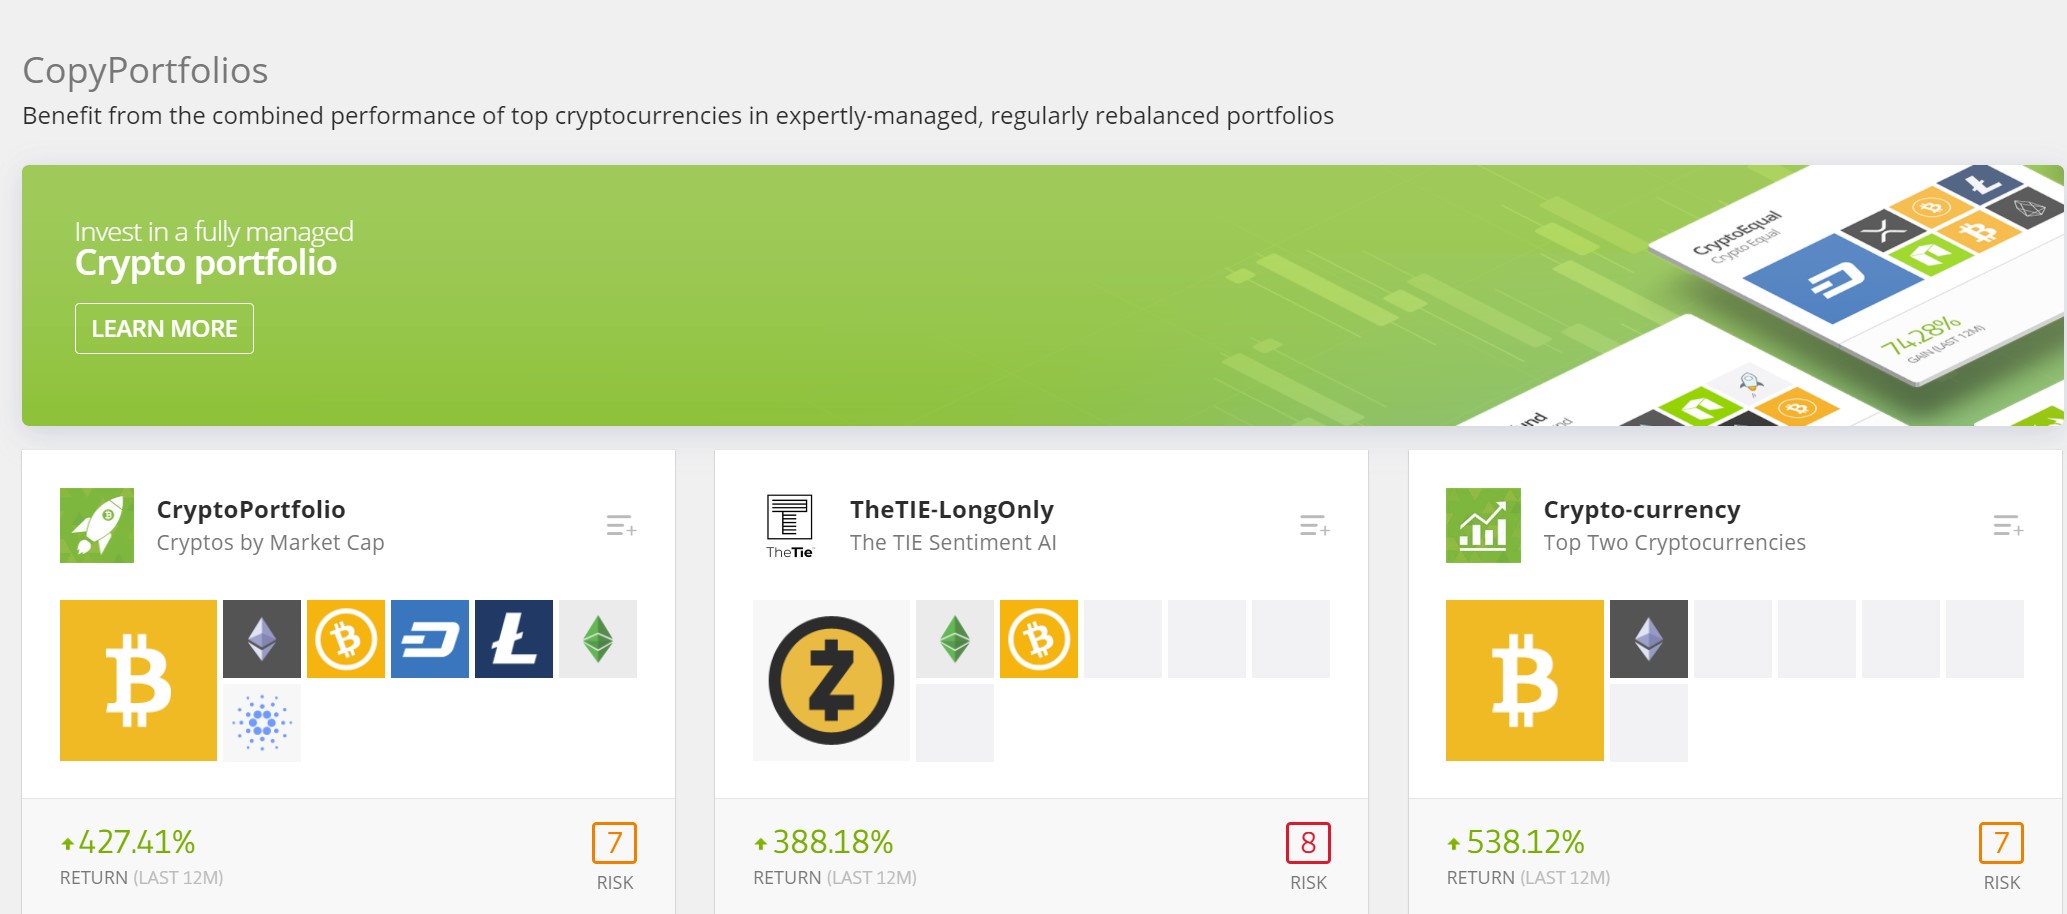 eToro US Review (2021) - Is It A Good Place to Buy Crypto?